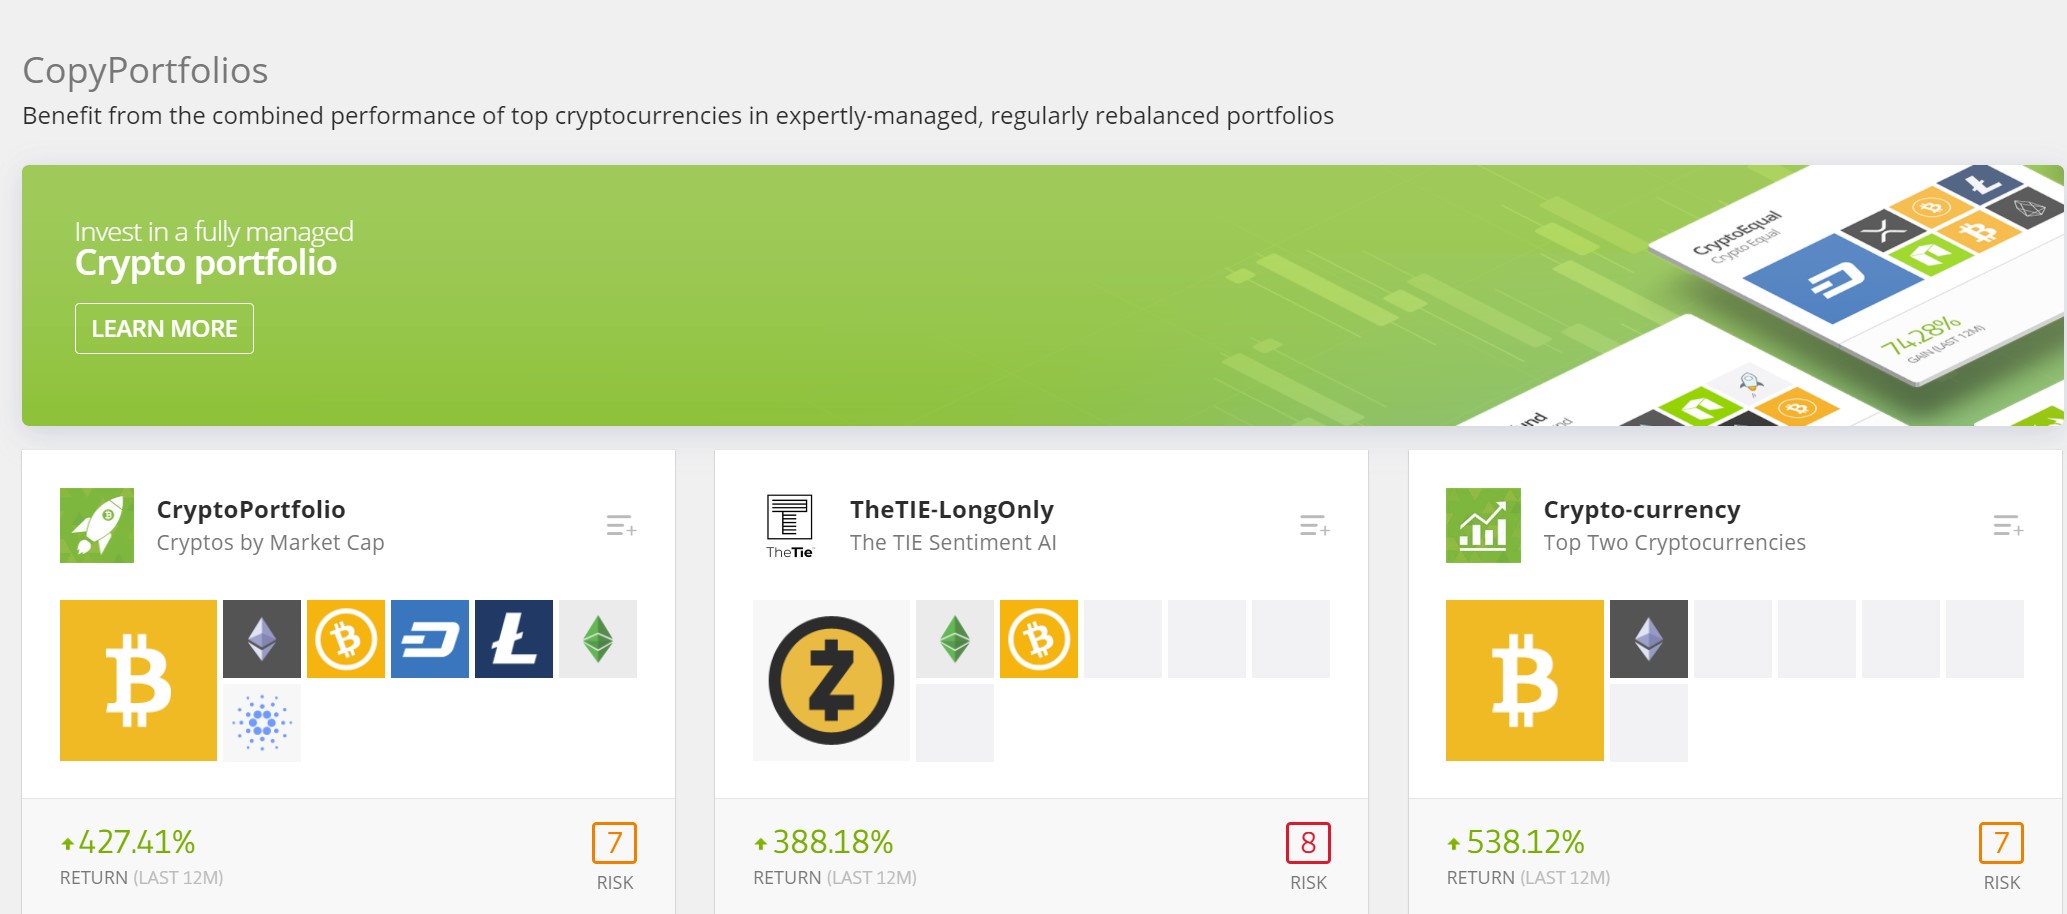 eToro US Review (2021) - Is It A Good Place to Buy Crypto?